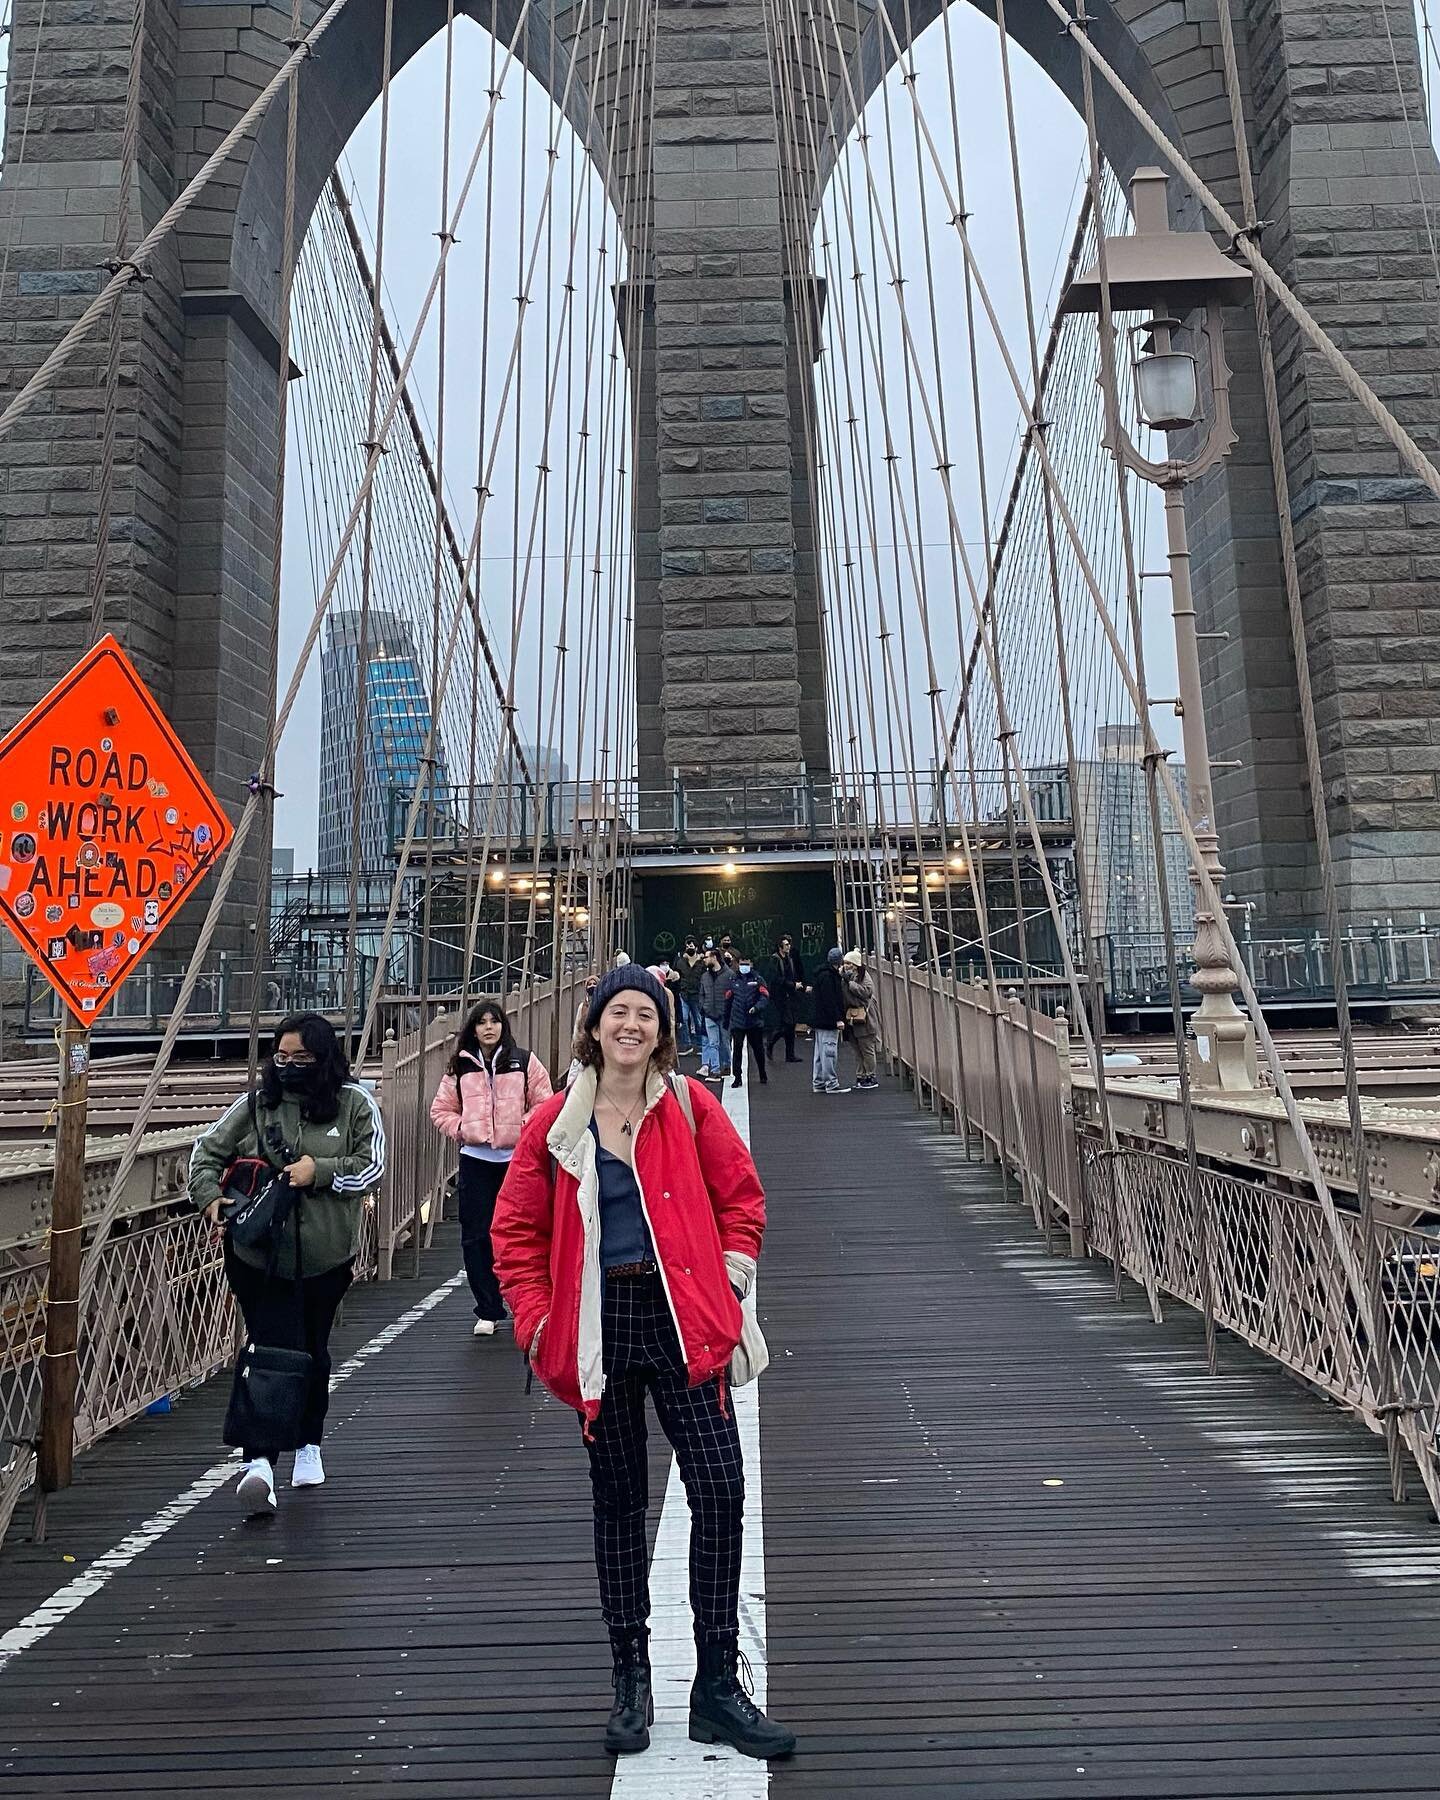 belated photo drop from my new years journey to NYC

1. brooklyn bridge
2. I found the only patch of snow in the whole city 
3. ramen at chelsea market
4. this really cool jacket from a thrift store in brooklyn that i should have bought but didn&rsqu